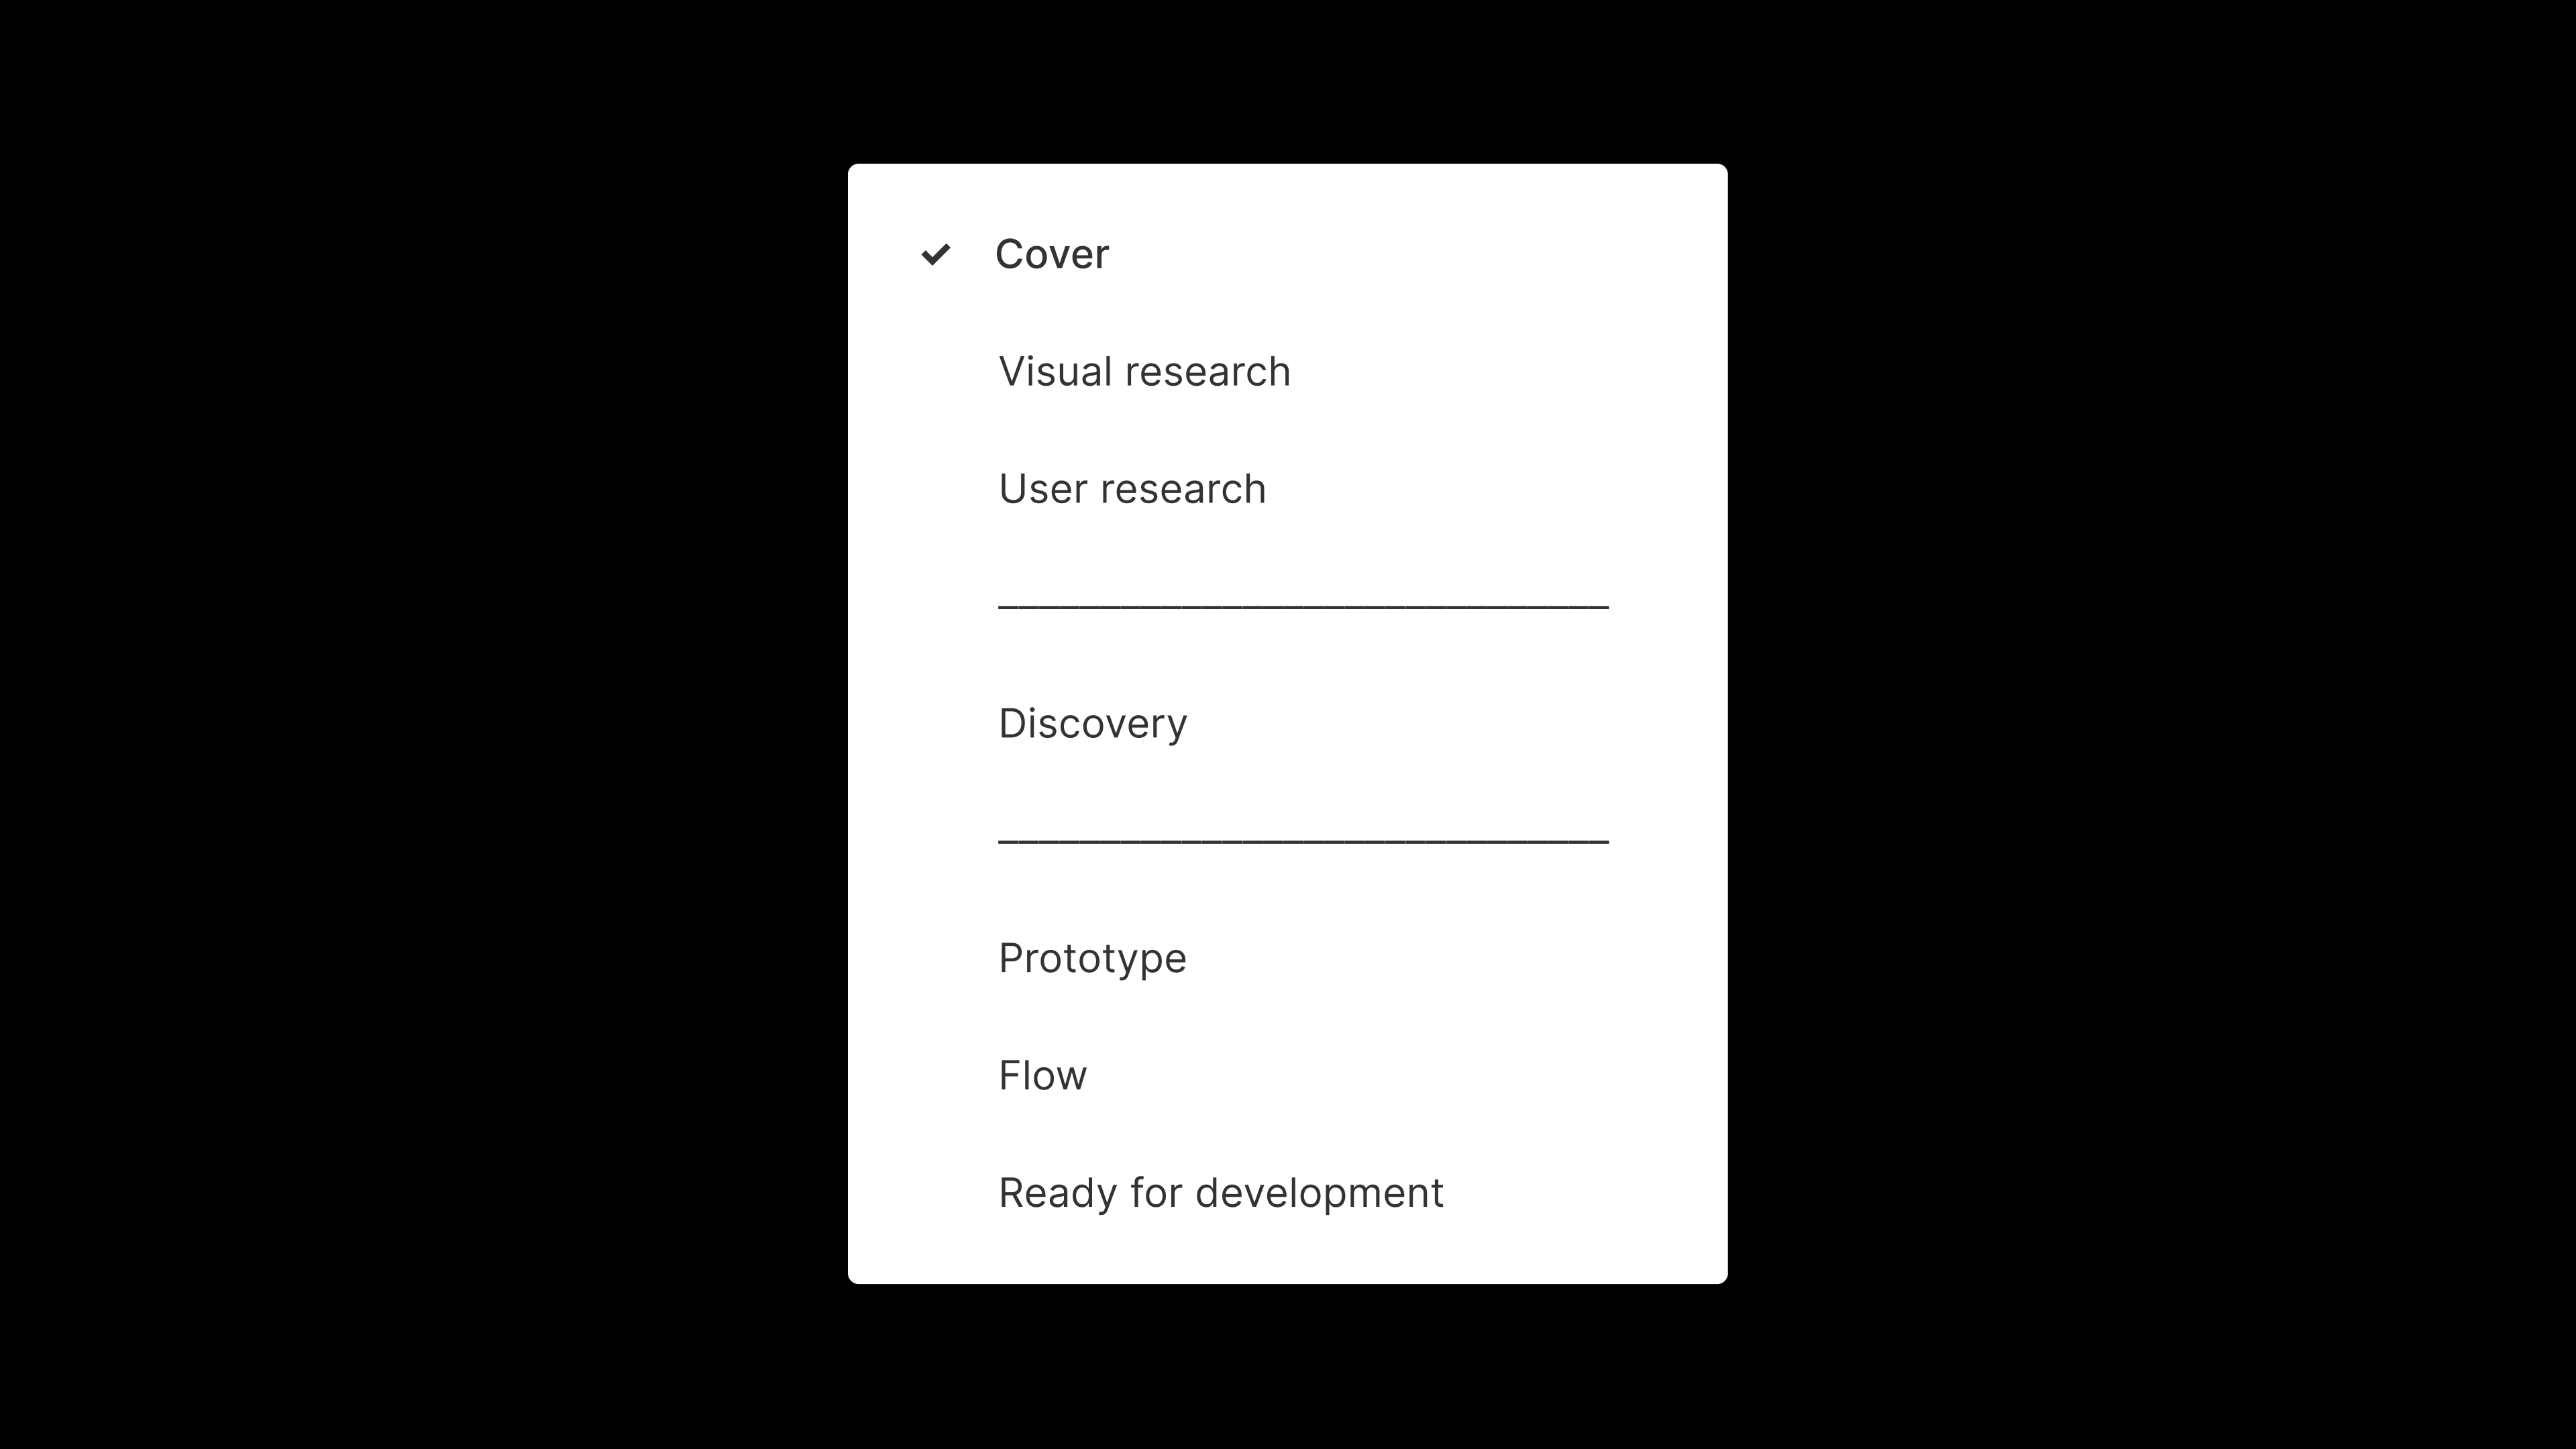 A screenshot of a Figma page structure. The pages listed read "Cover," "Visual research," "User research," "Discovery," "Prototype," Flow," and "Ready for development." There are separators between "User research" and "Discovery," and "Discovery" and "Prototype."